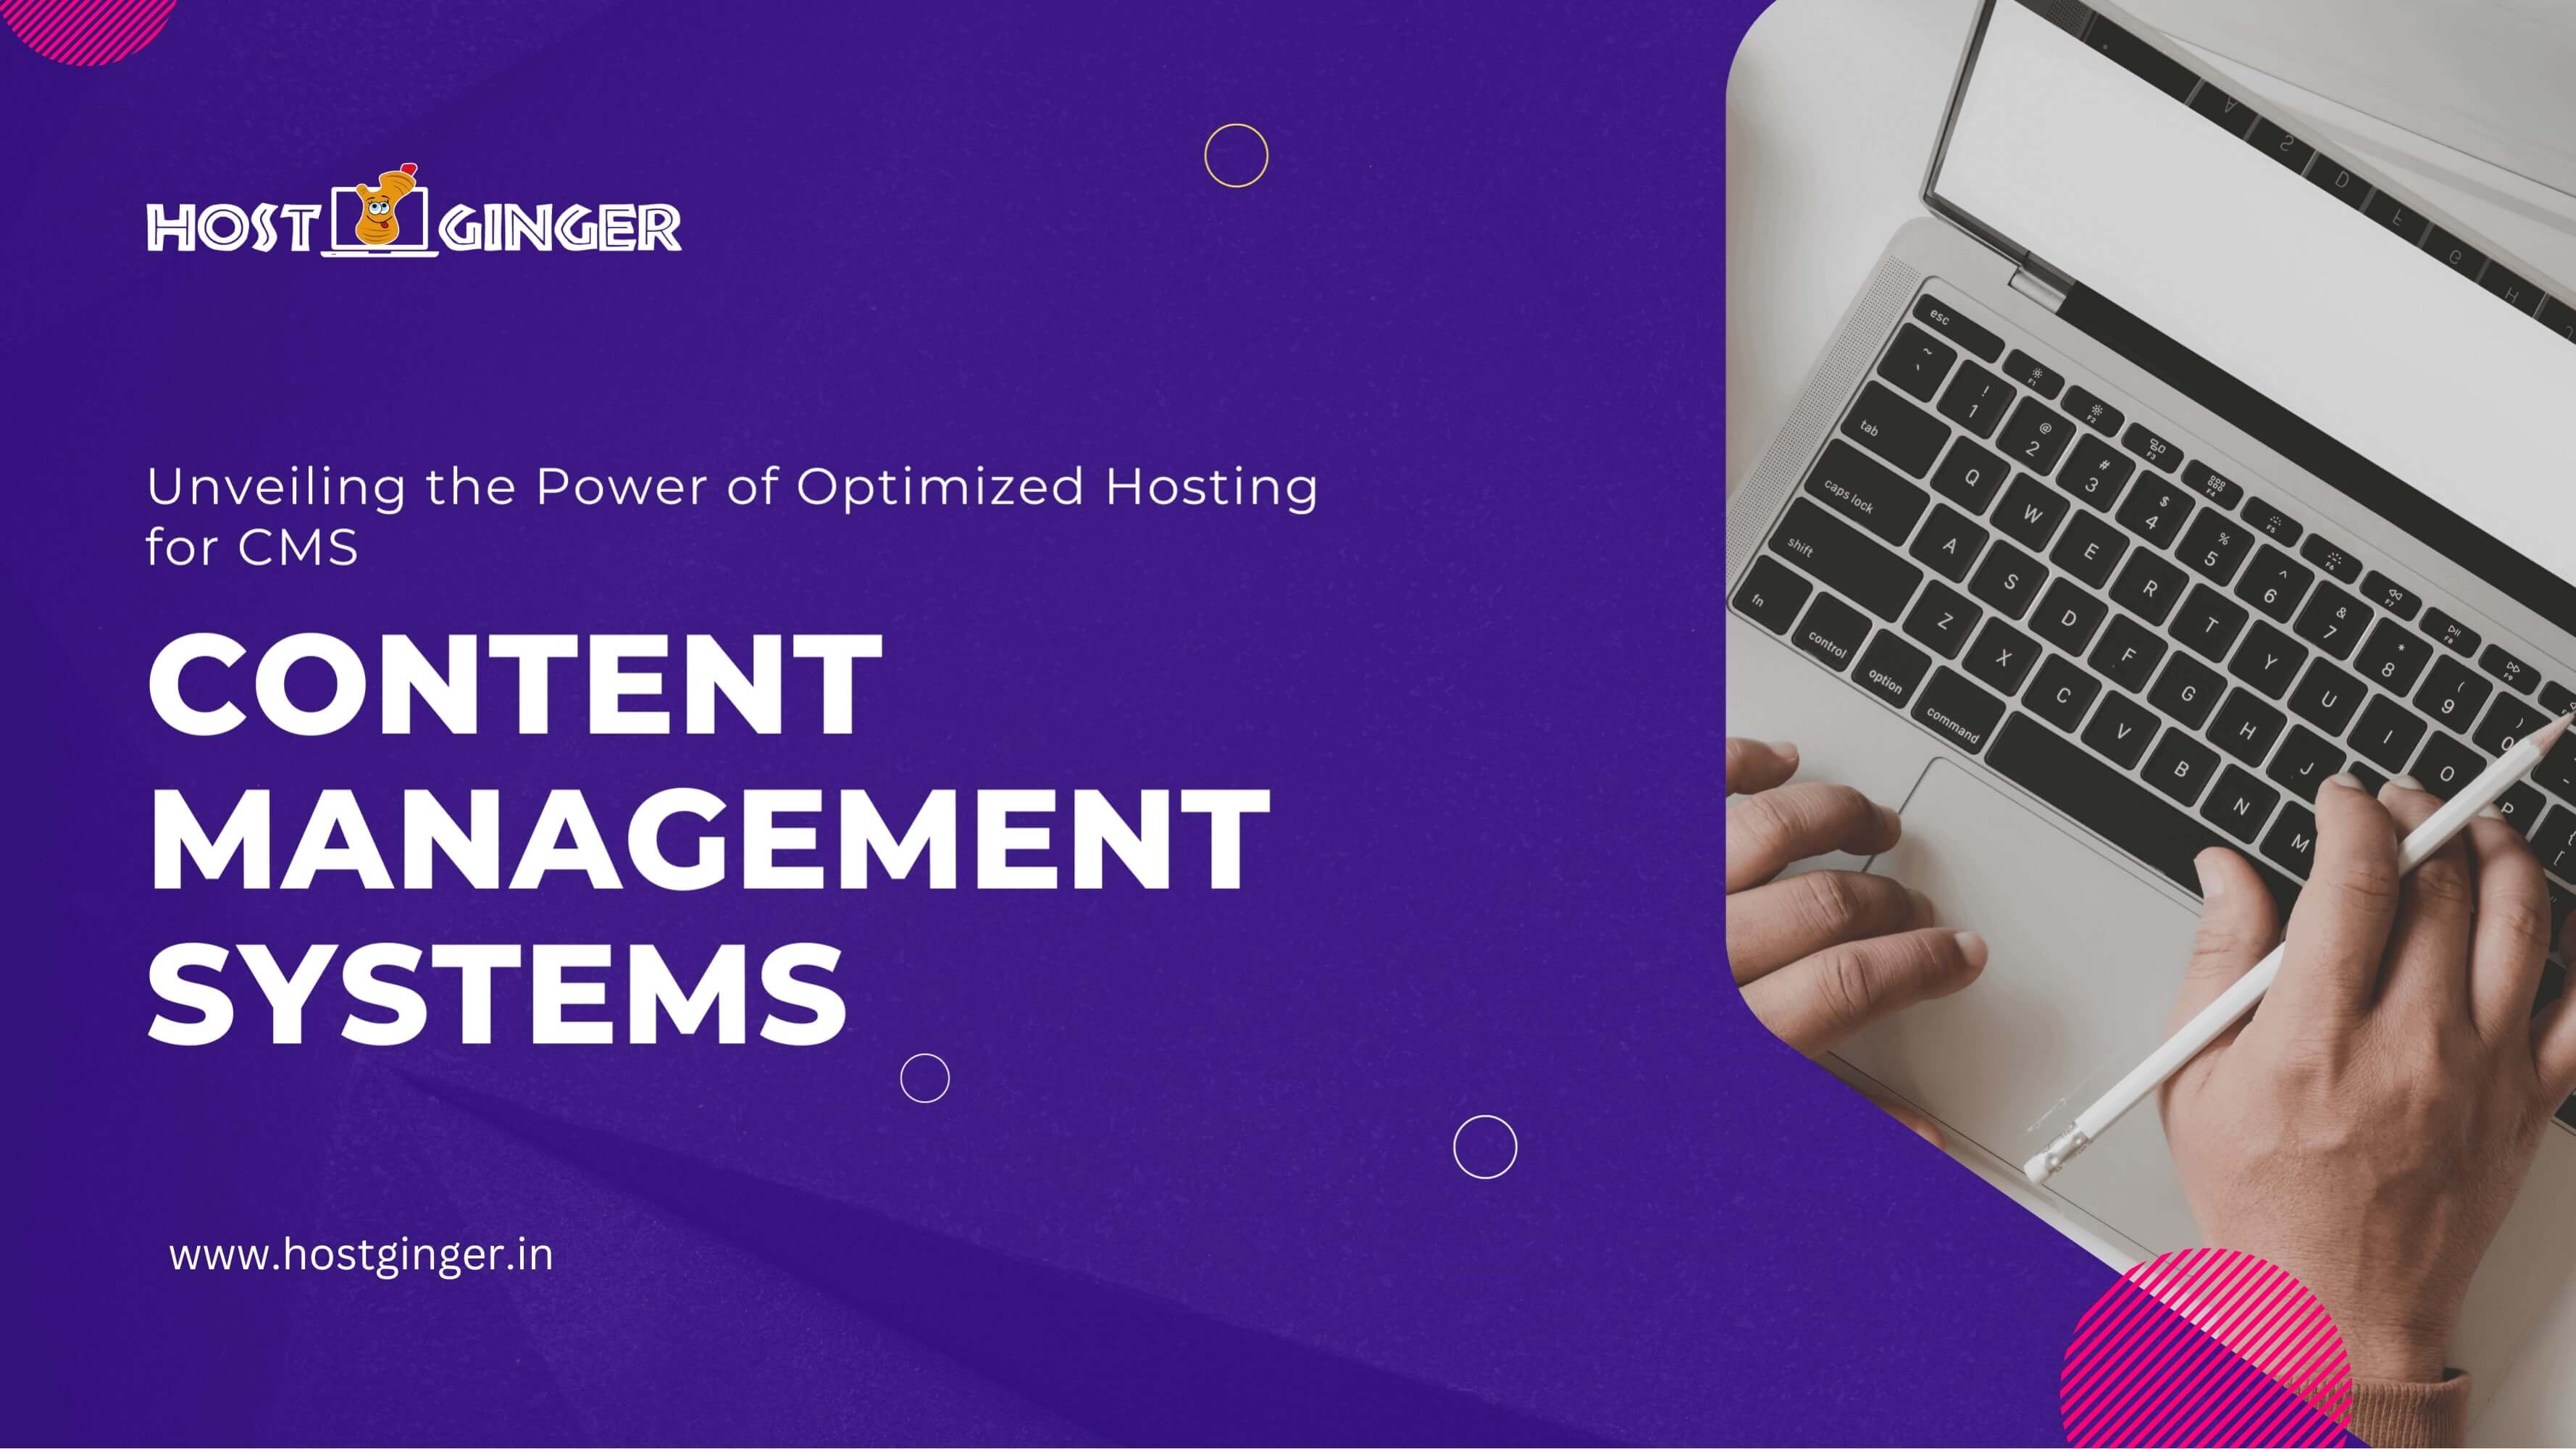 Optimized Hosting for Content Management Systems